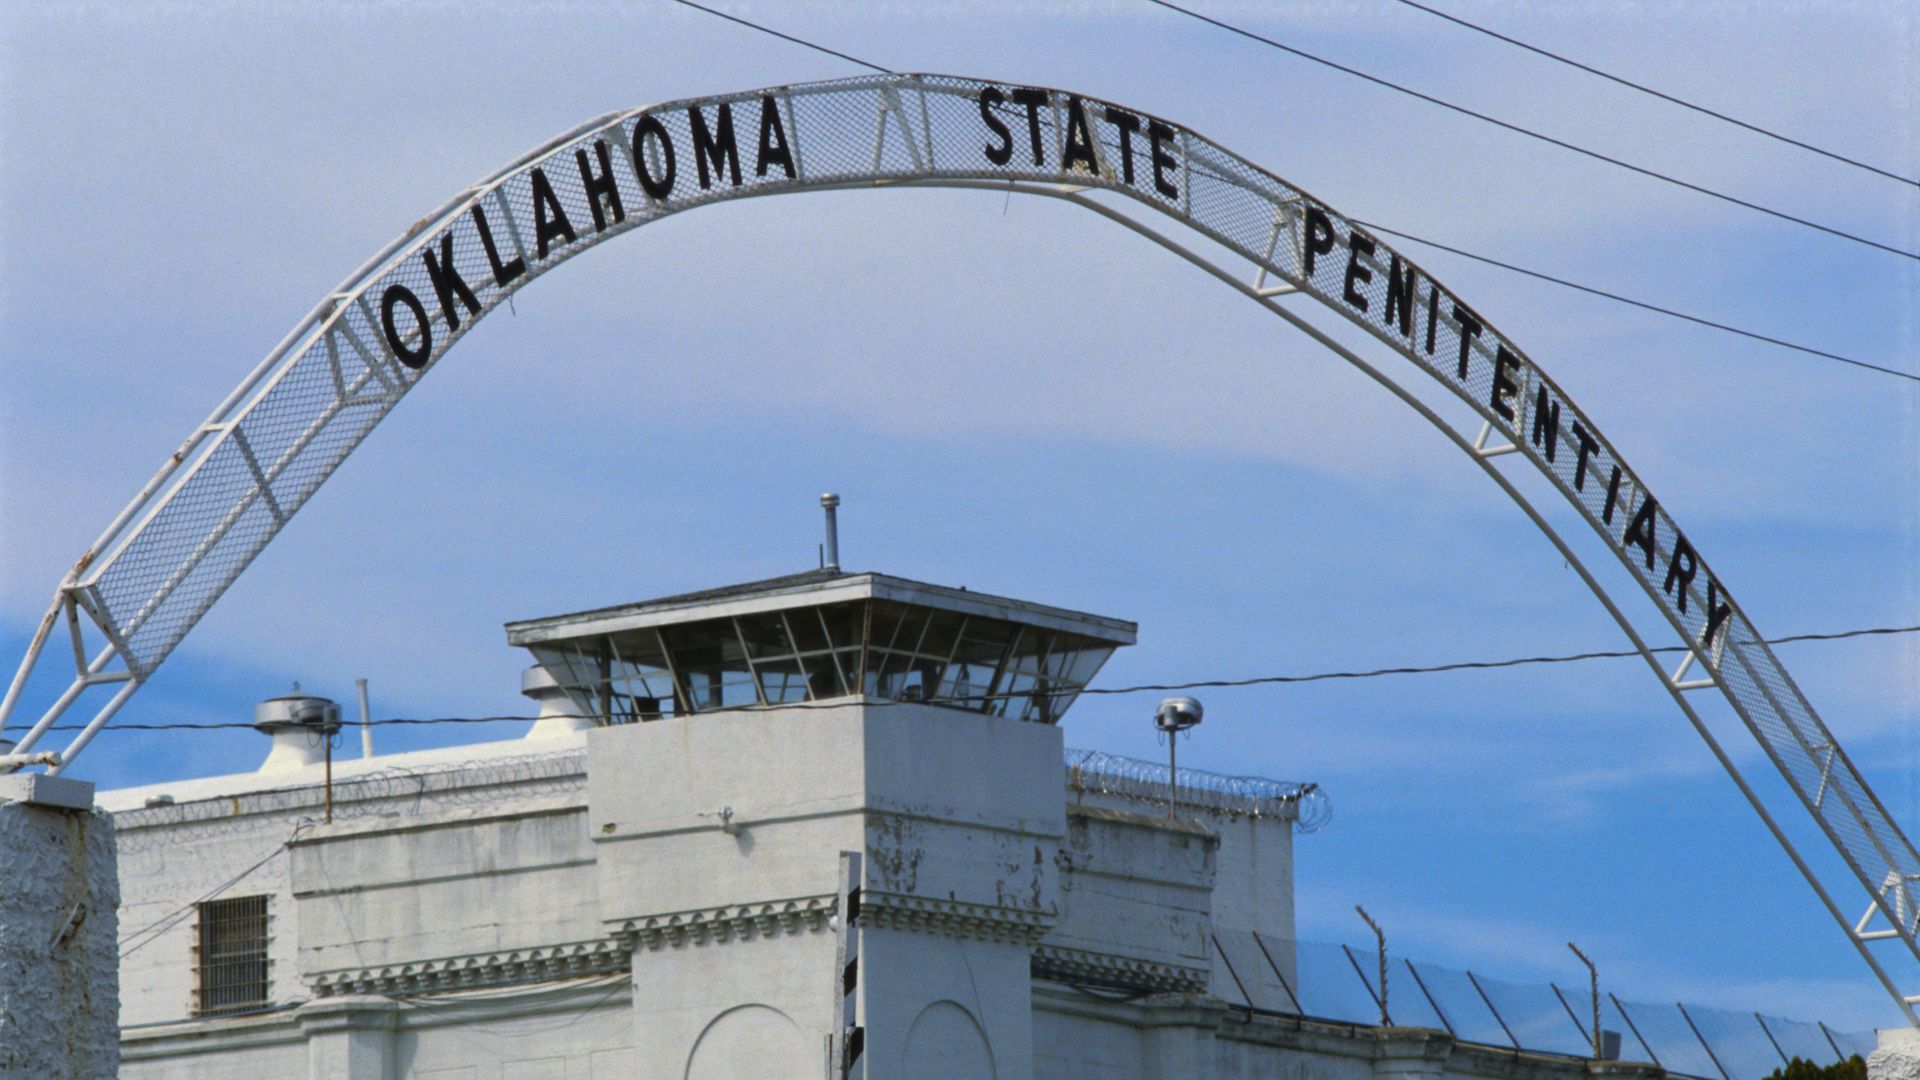 Picture of a prison with a sign that reads "Oklahoma State Penitentiary"